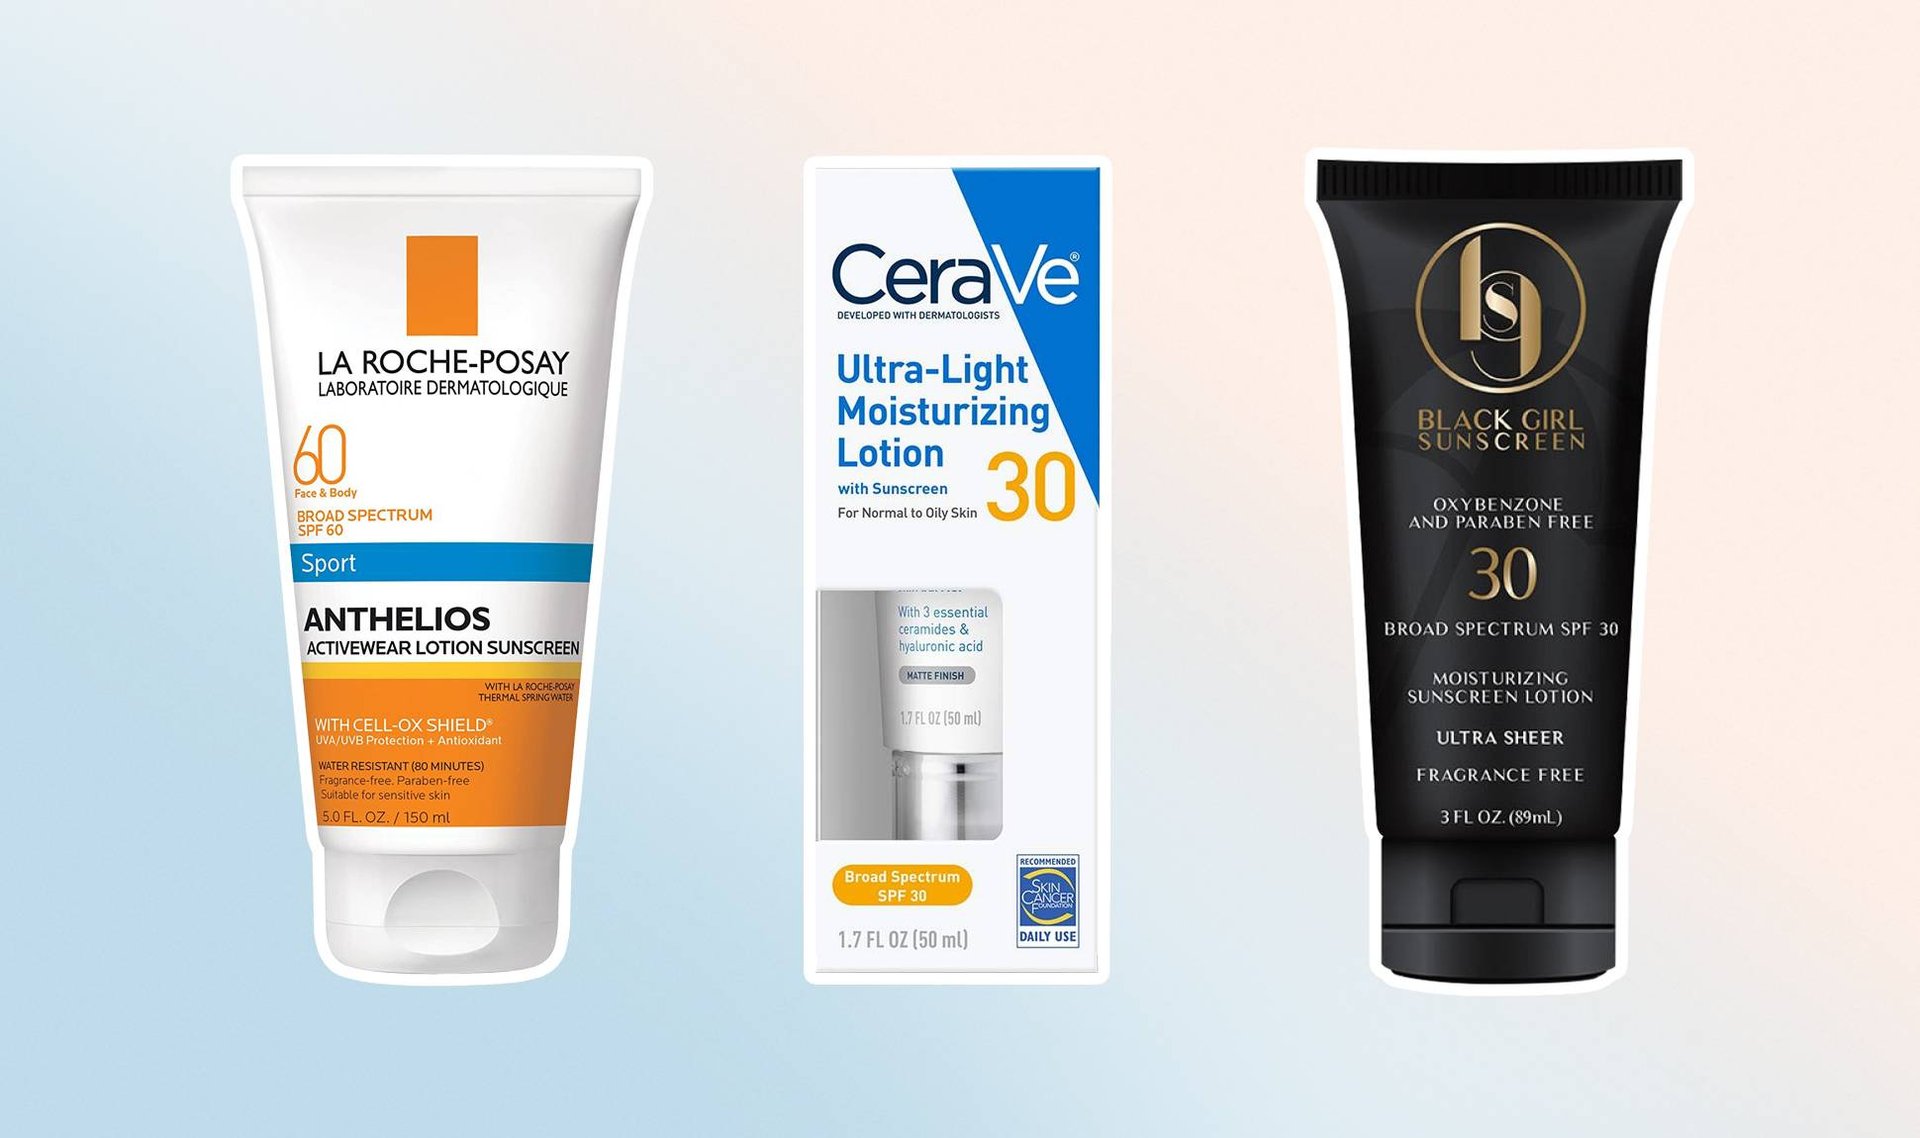 These Are the Sunscreens Our Editors Wear While Working Out